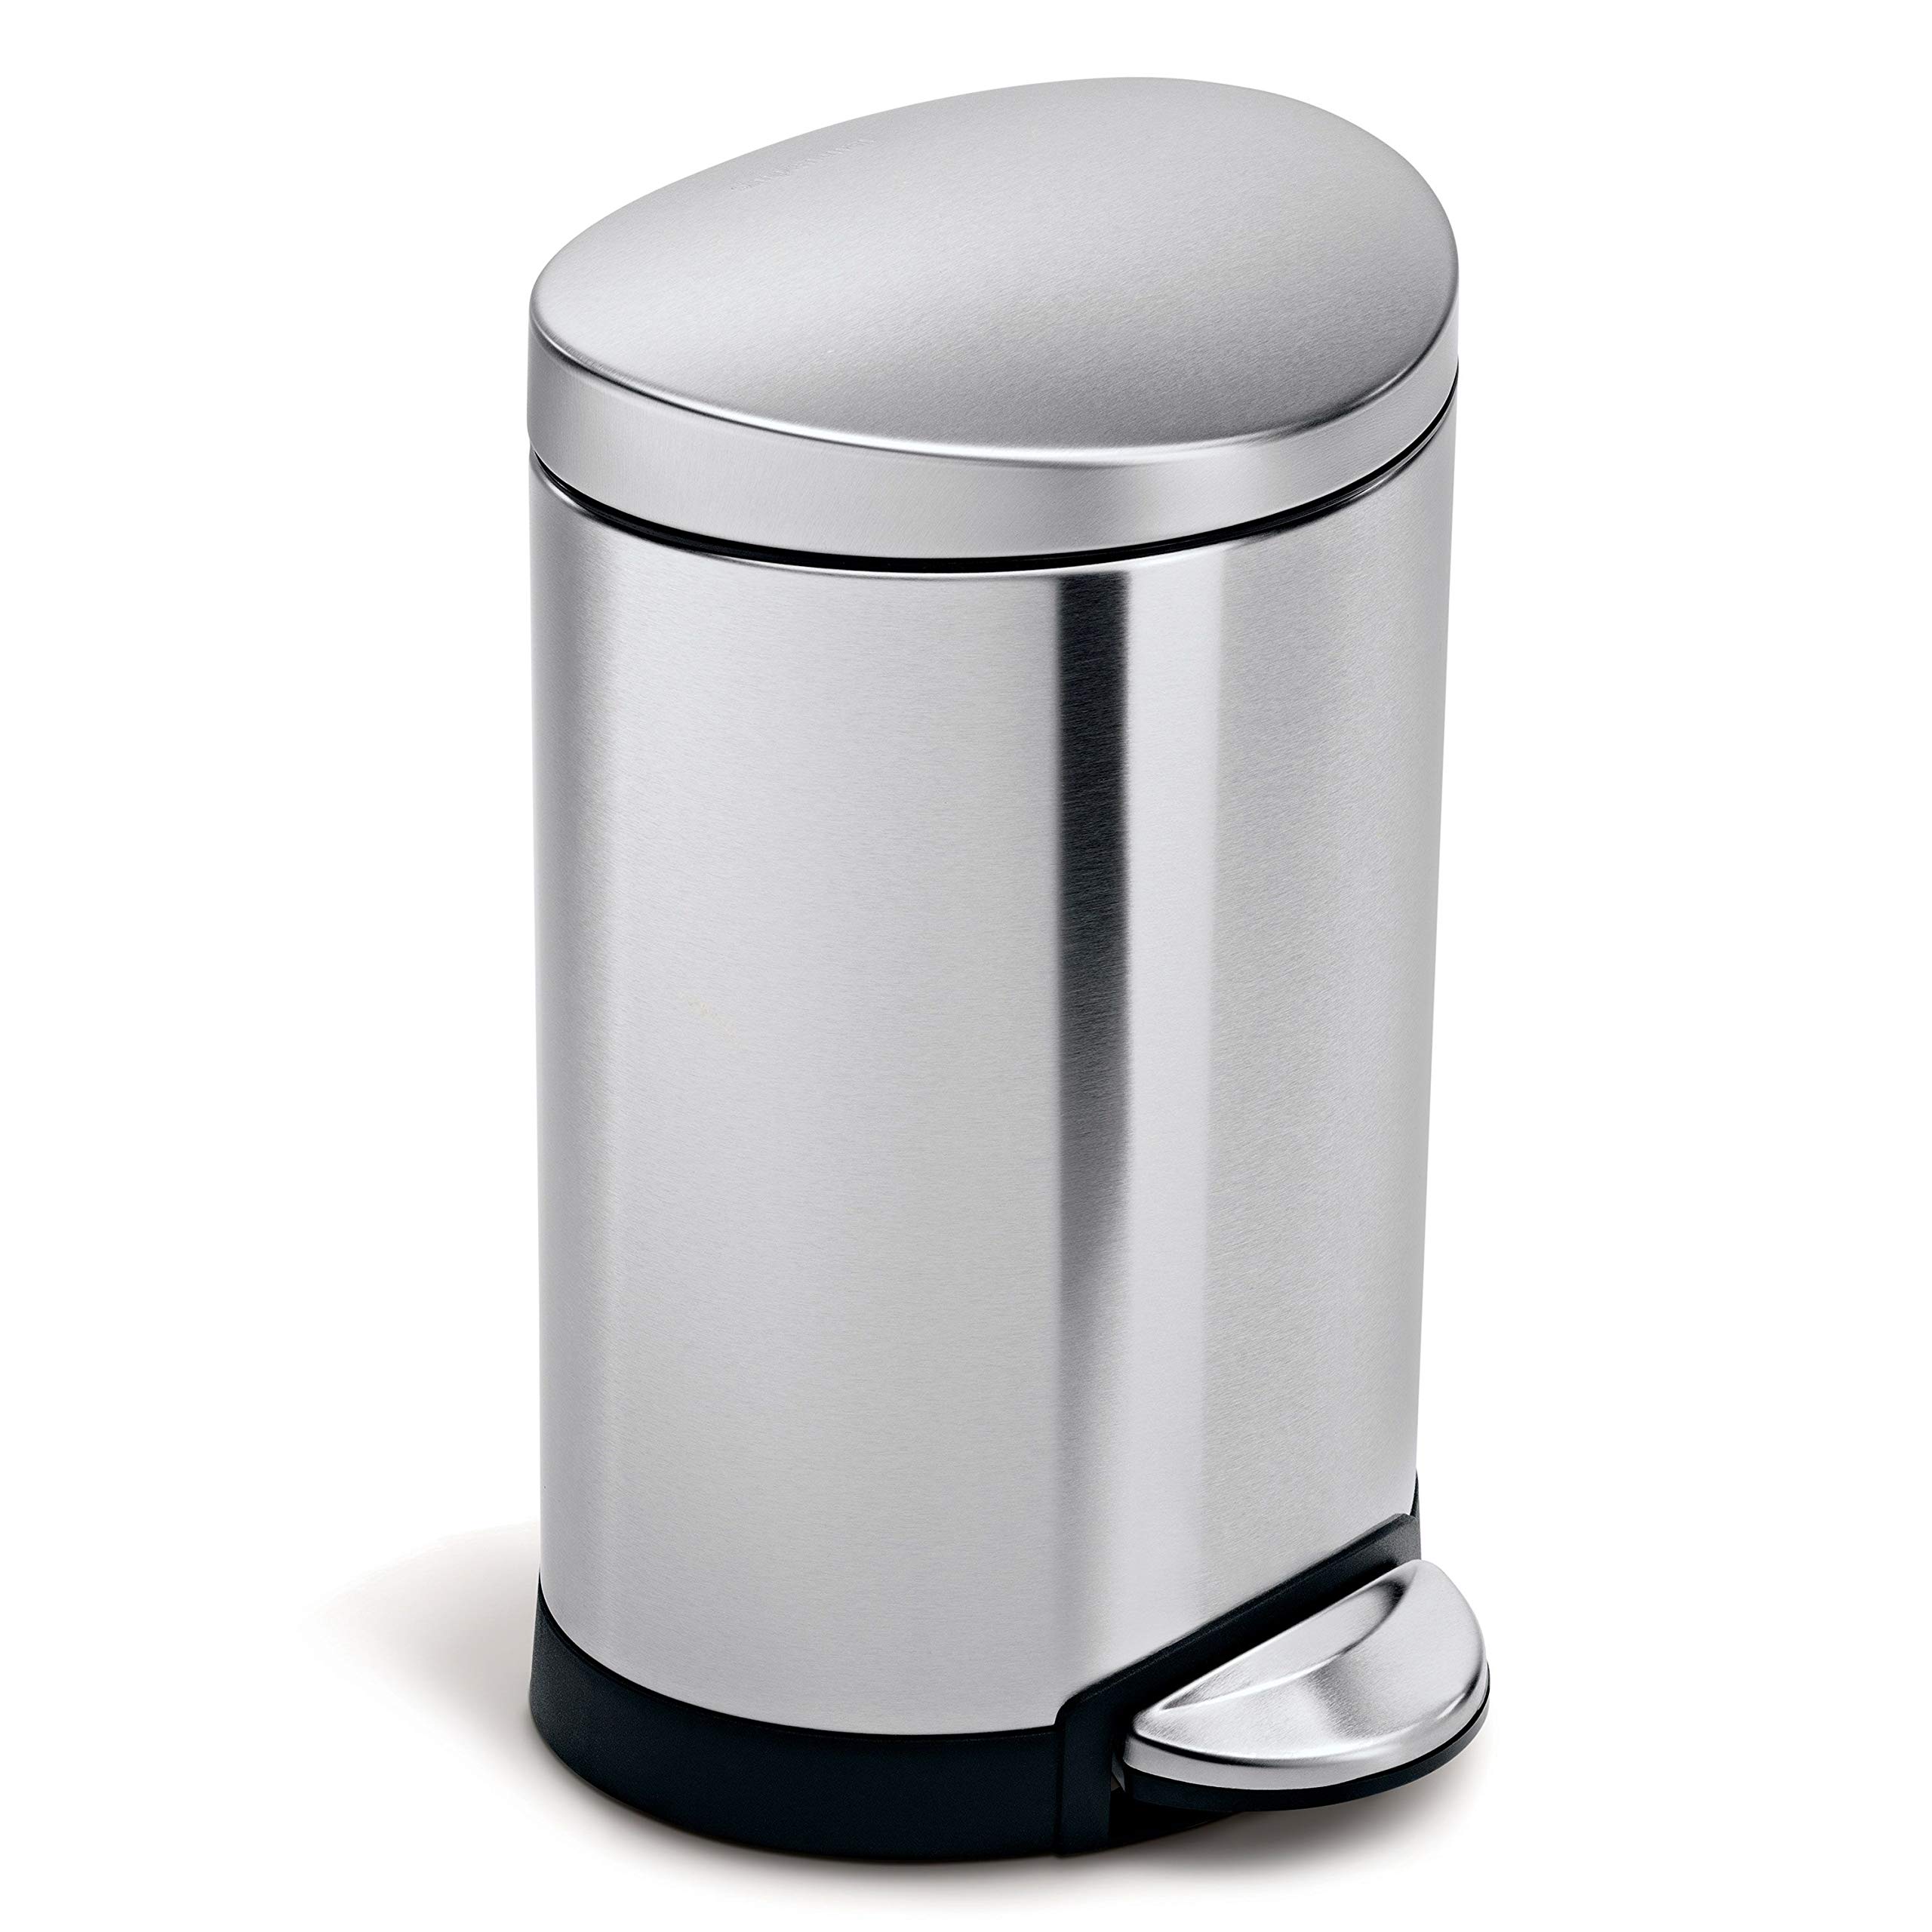 Book Cover simplehuman 6 Liter / 1.6 Gallon Semi-Round Bathroom Step Trash Can, Brushed Stainless Steel Brushed Stainless Steel 6 Liter Semi-Round